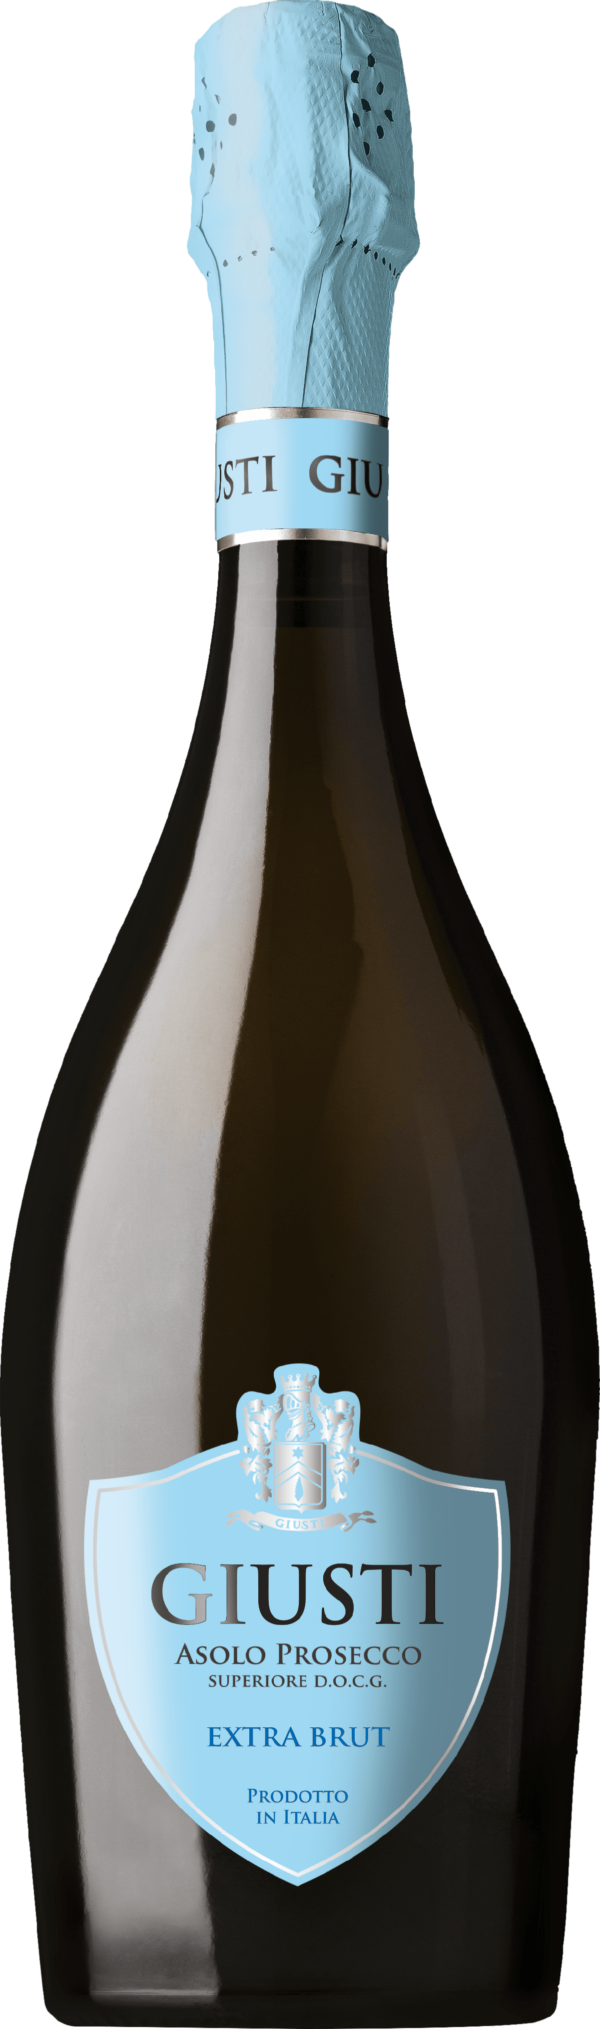 Product image of Giusti Asolo Prosecco Superiore Extra Brut from 8wines